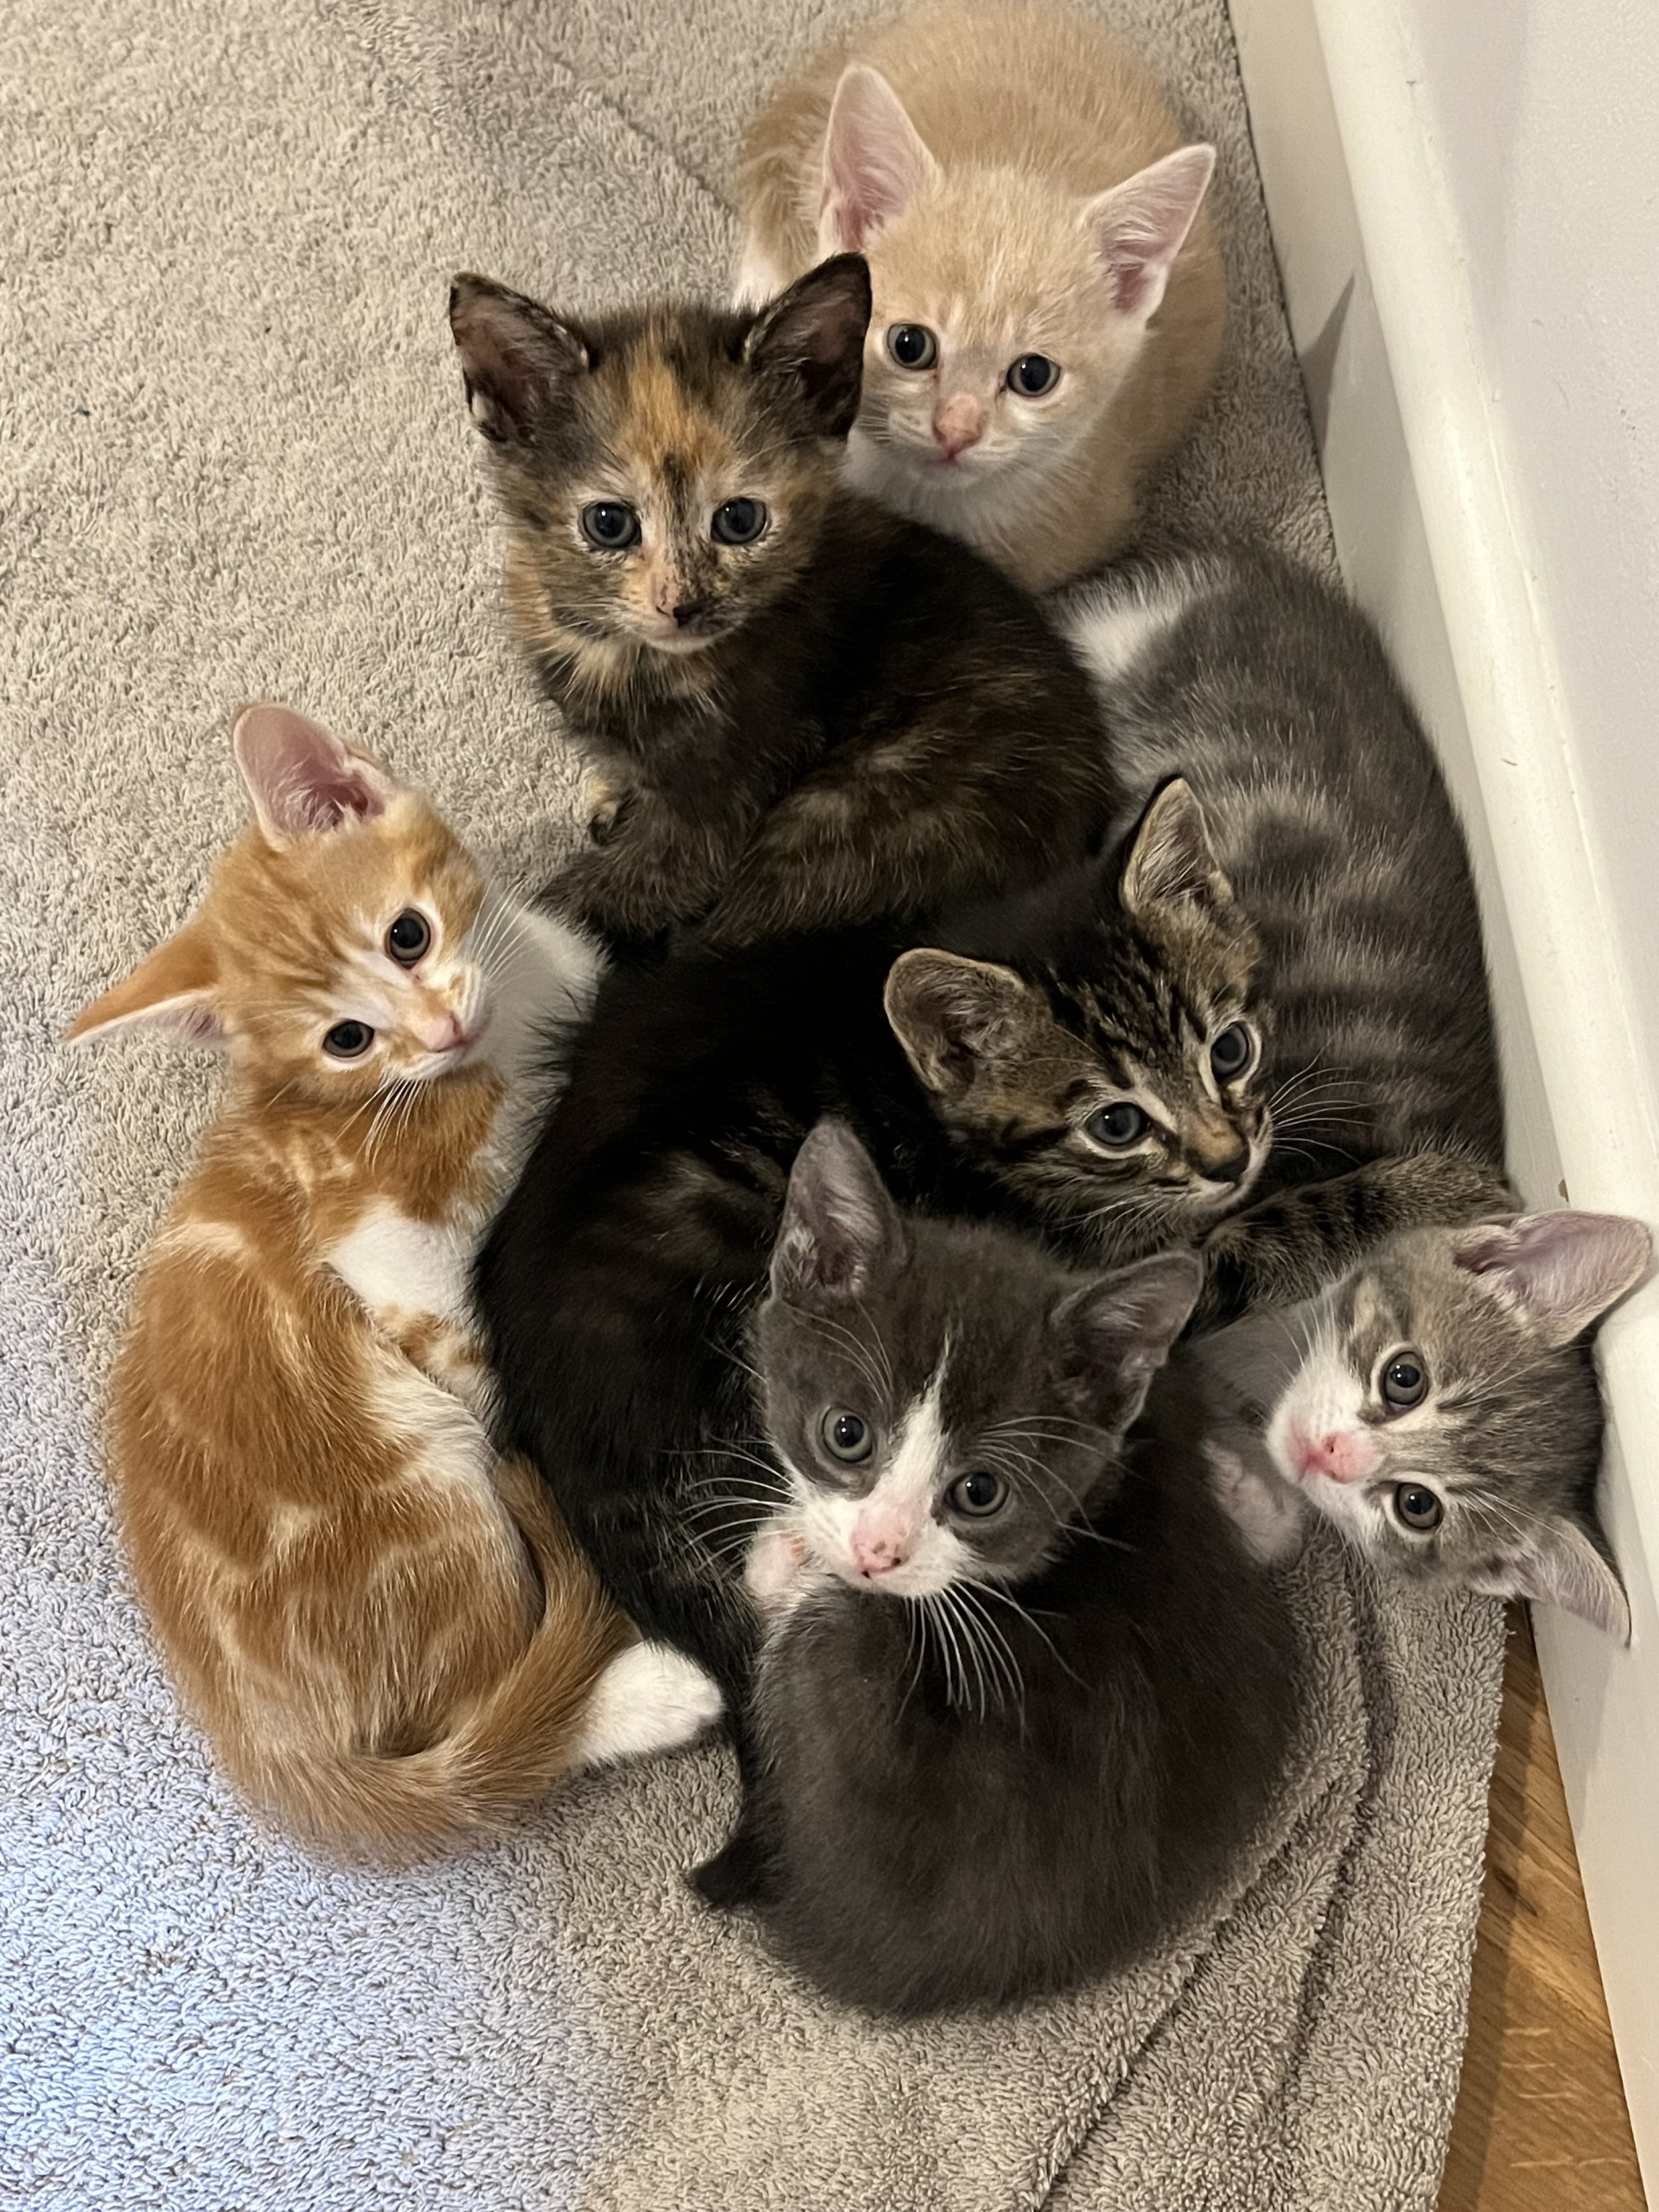 six kittens ginger tortie grey tabby looking for loving forever home with garden or spacious indoor home with enrichment at Catcuddles London